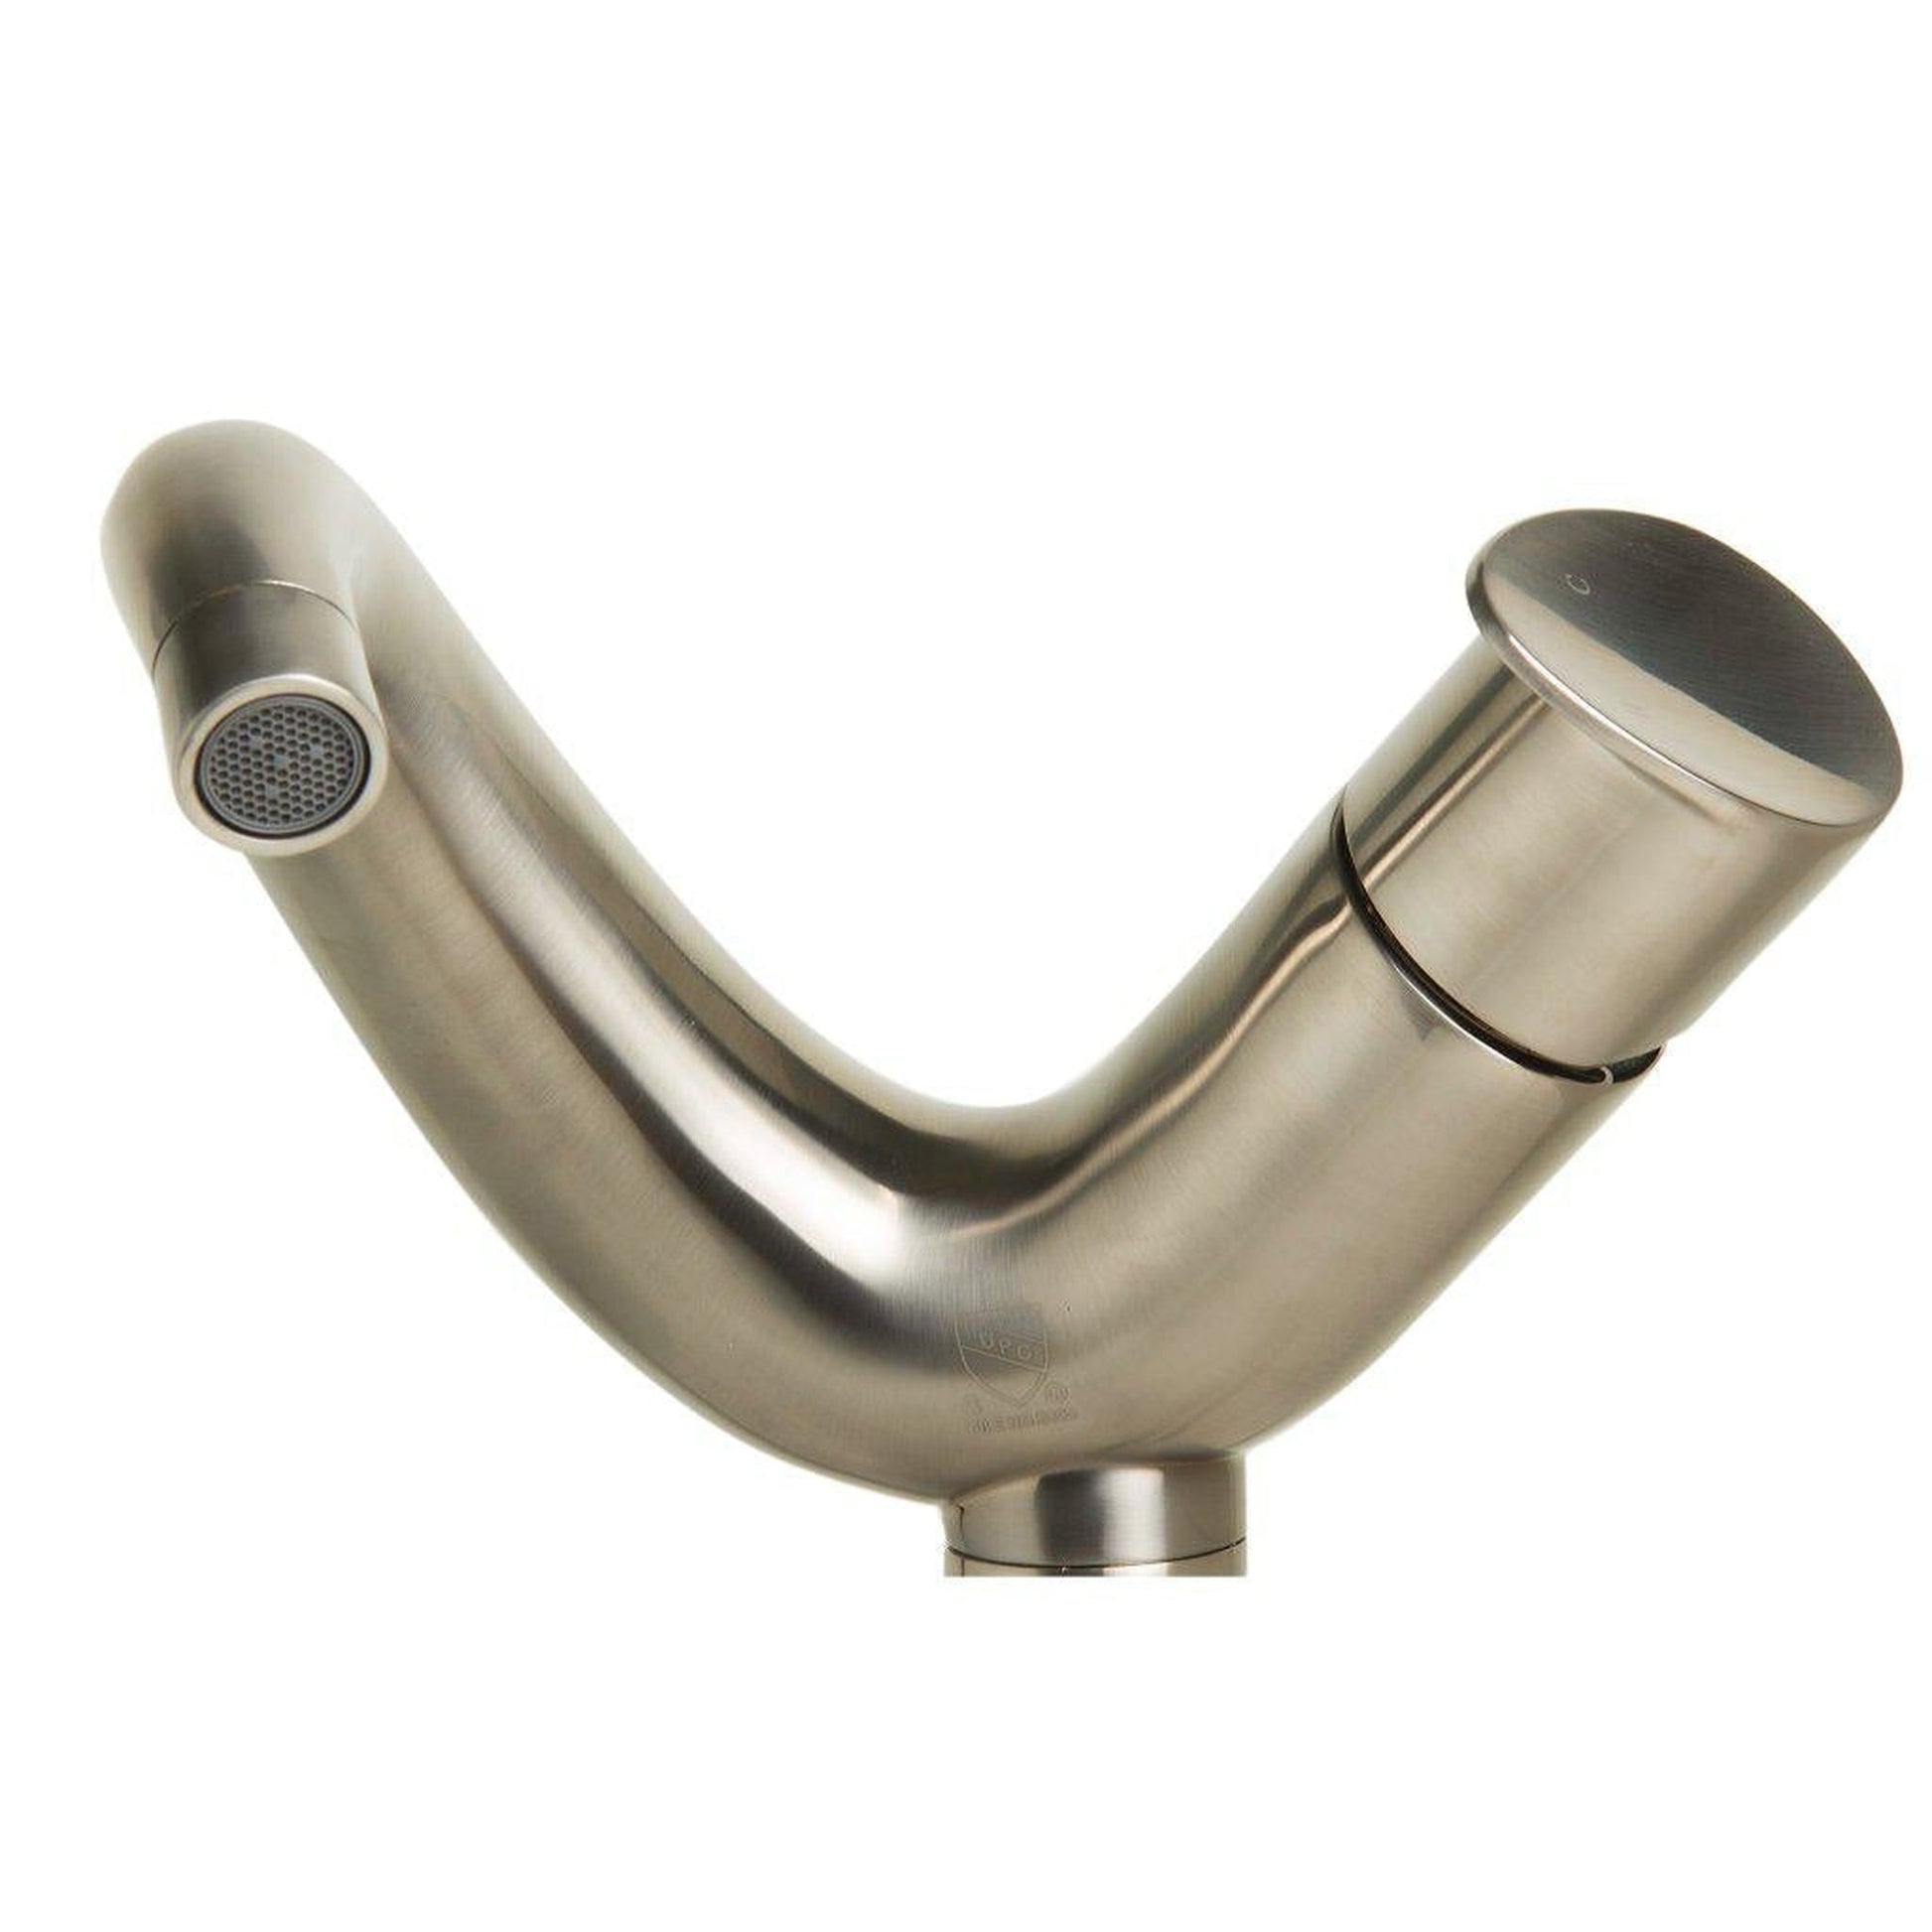 ALFI Brand AB1570-BN Brushed Nickel Vessel Wave Spout Brass Bathroom Sink Faucet With Single Lever